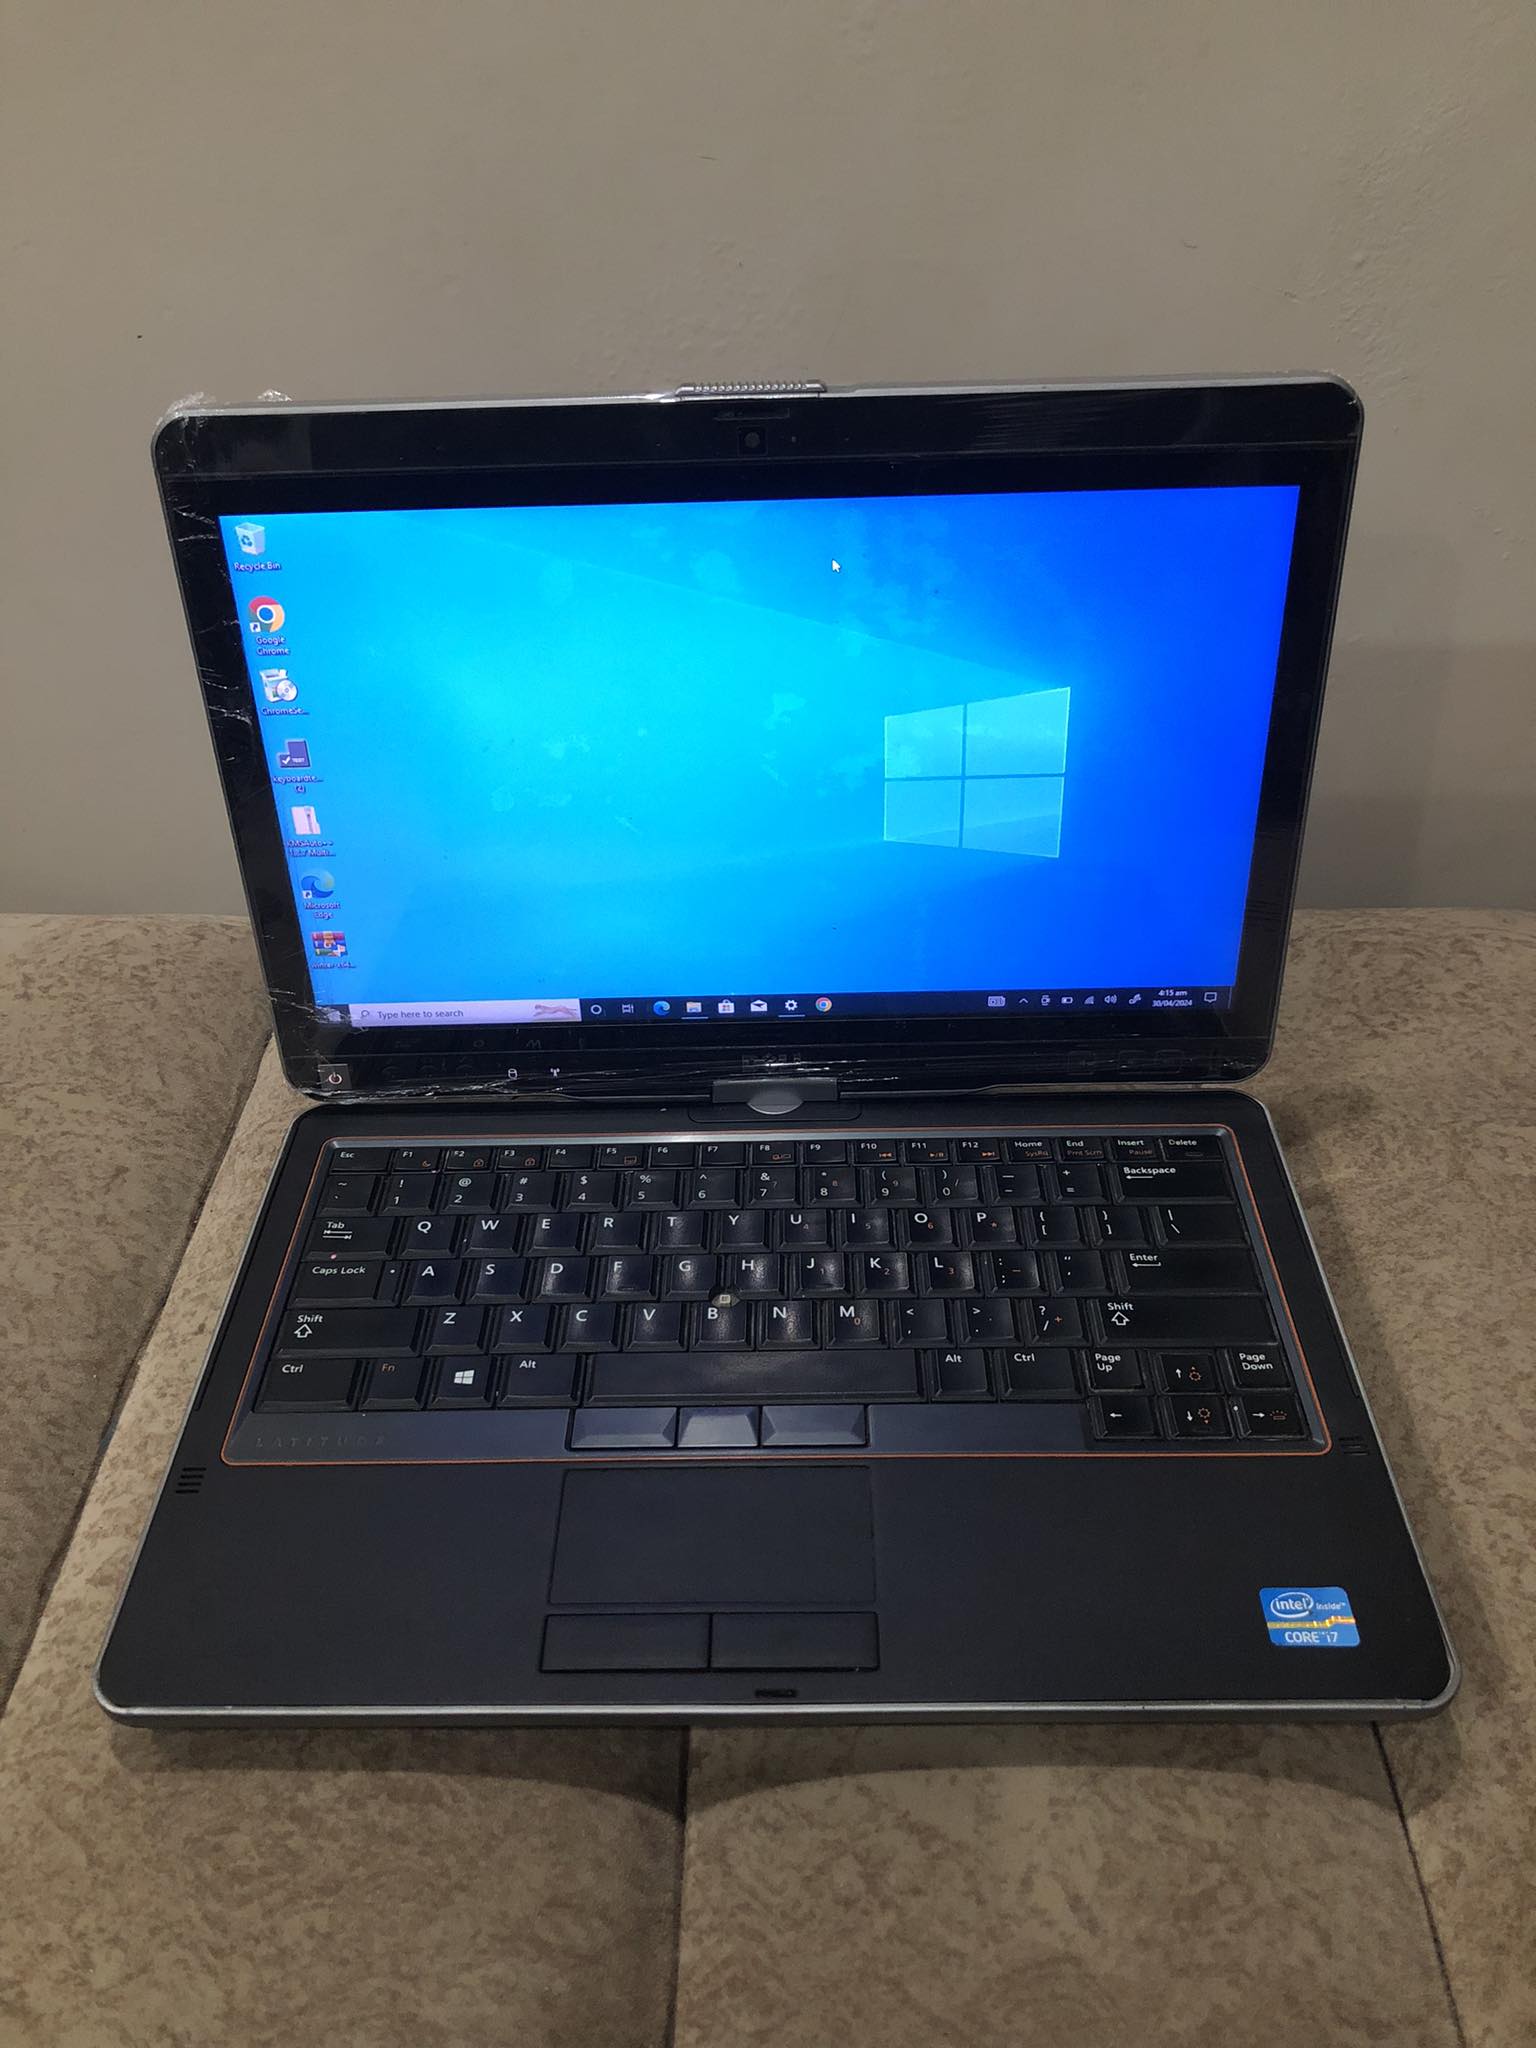 Dell Latitude XT3 Core i7 2nd Generation Blacklight Keyboard Touch Screen 360 Rotation Plus tab & Pen Awesome laptop